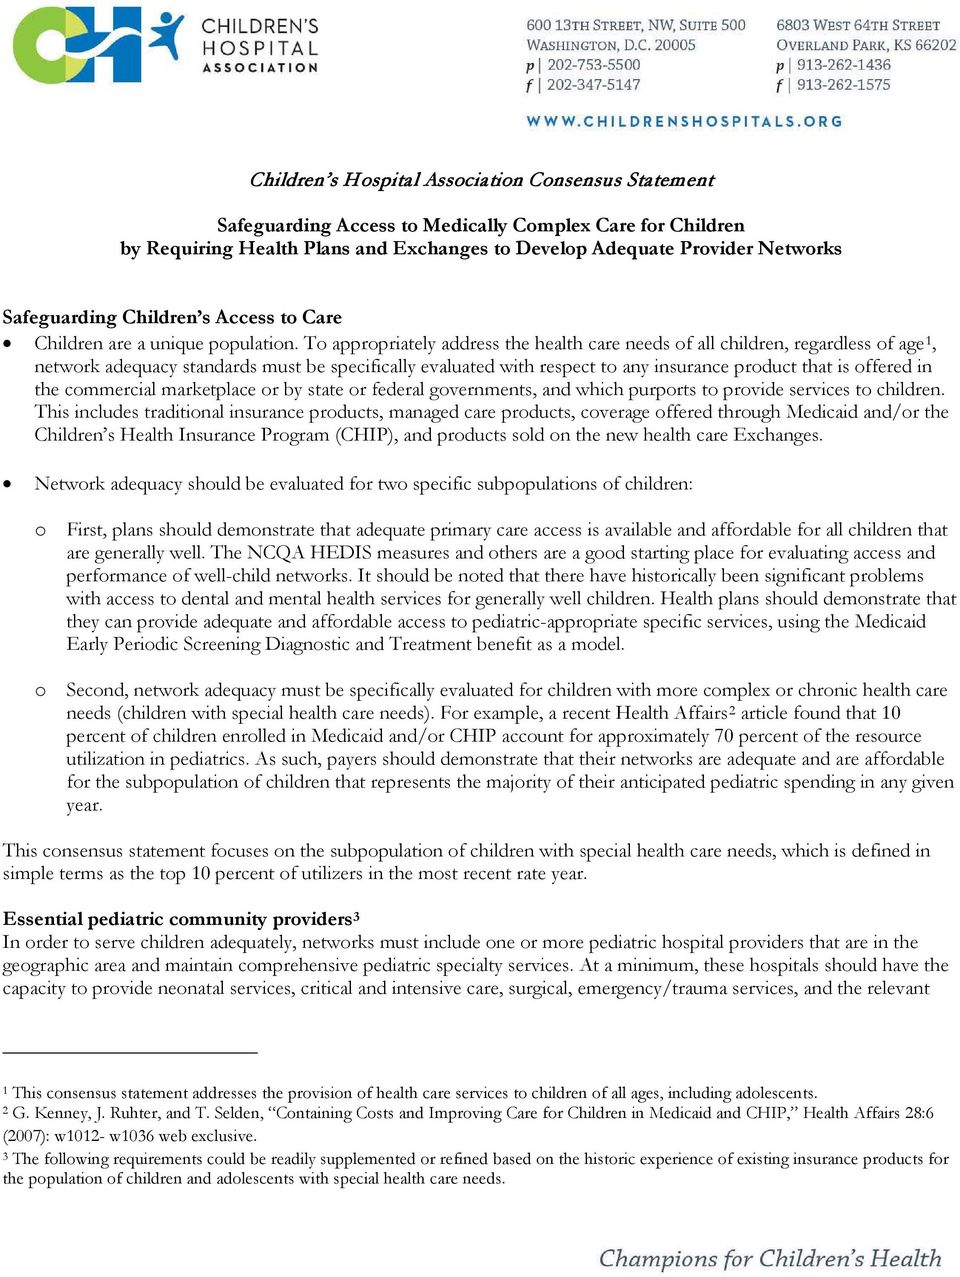 To appropriately address the health care needs of all children, regardless of age 1, network adequacy standards must be specifically evaluated with respect to any insurance product that is offered in